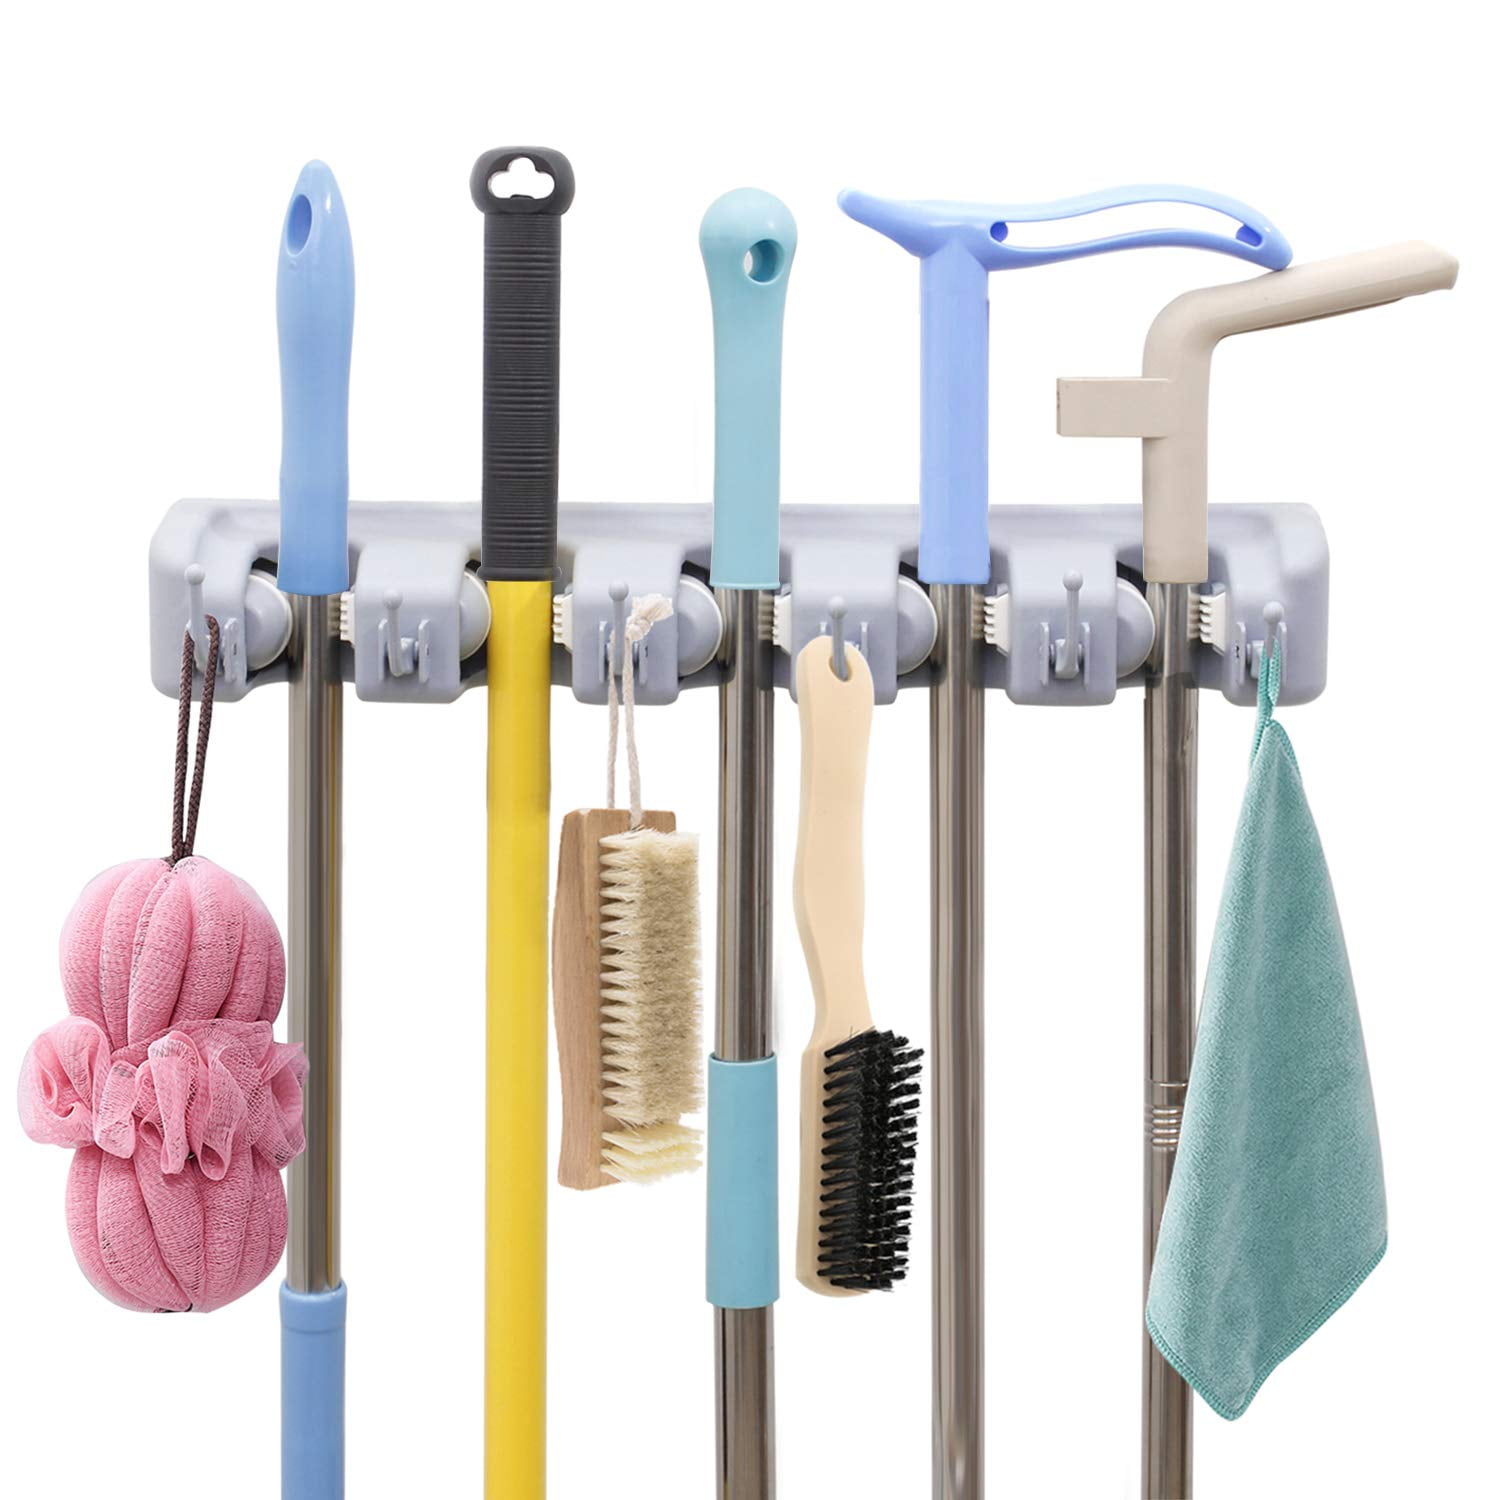 2 Packs Mops and Broom Hanger for Bathroom Kitchen Garden and Garage Mop Broom Holders with Hooks Self Adhesive Wall Mounted Home Organizer & Tool Storage Mops Hooks with Spring Clip